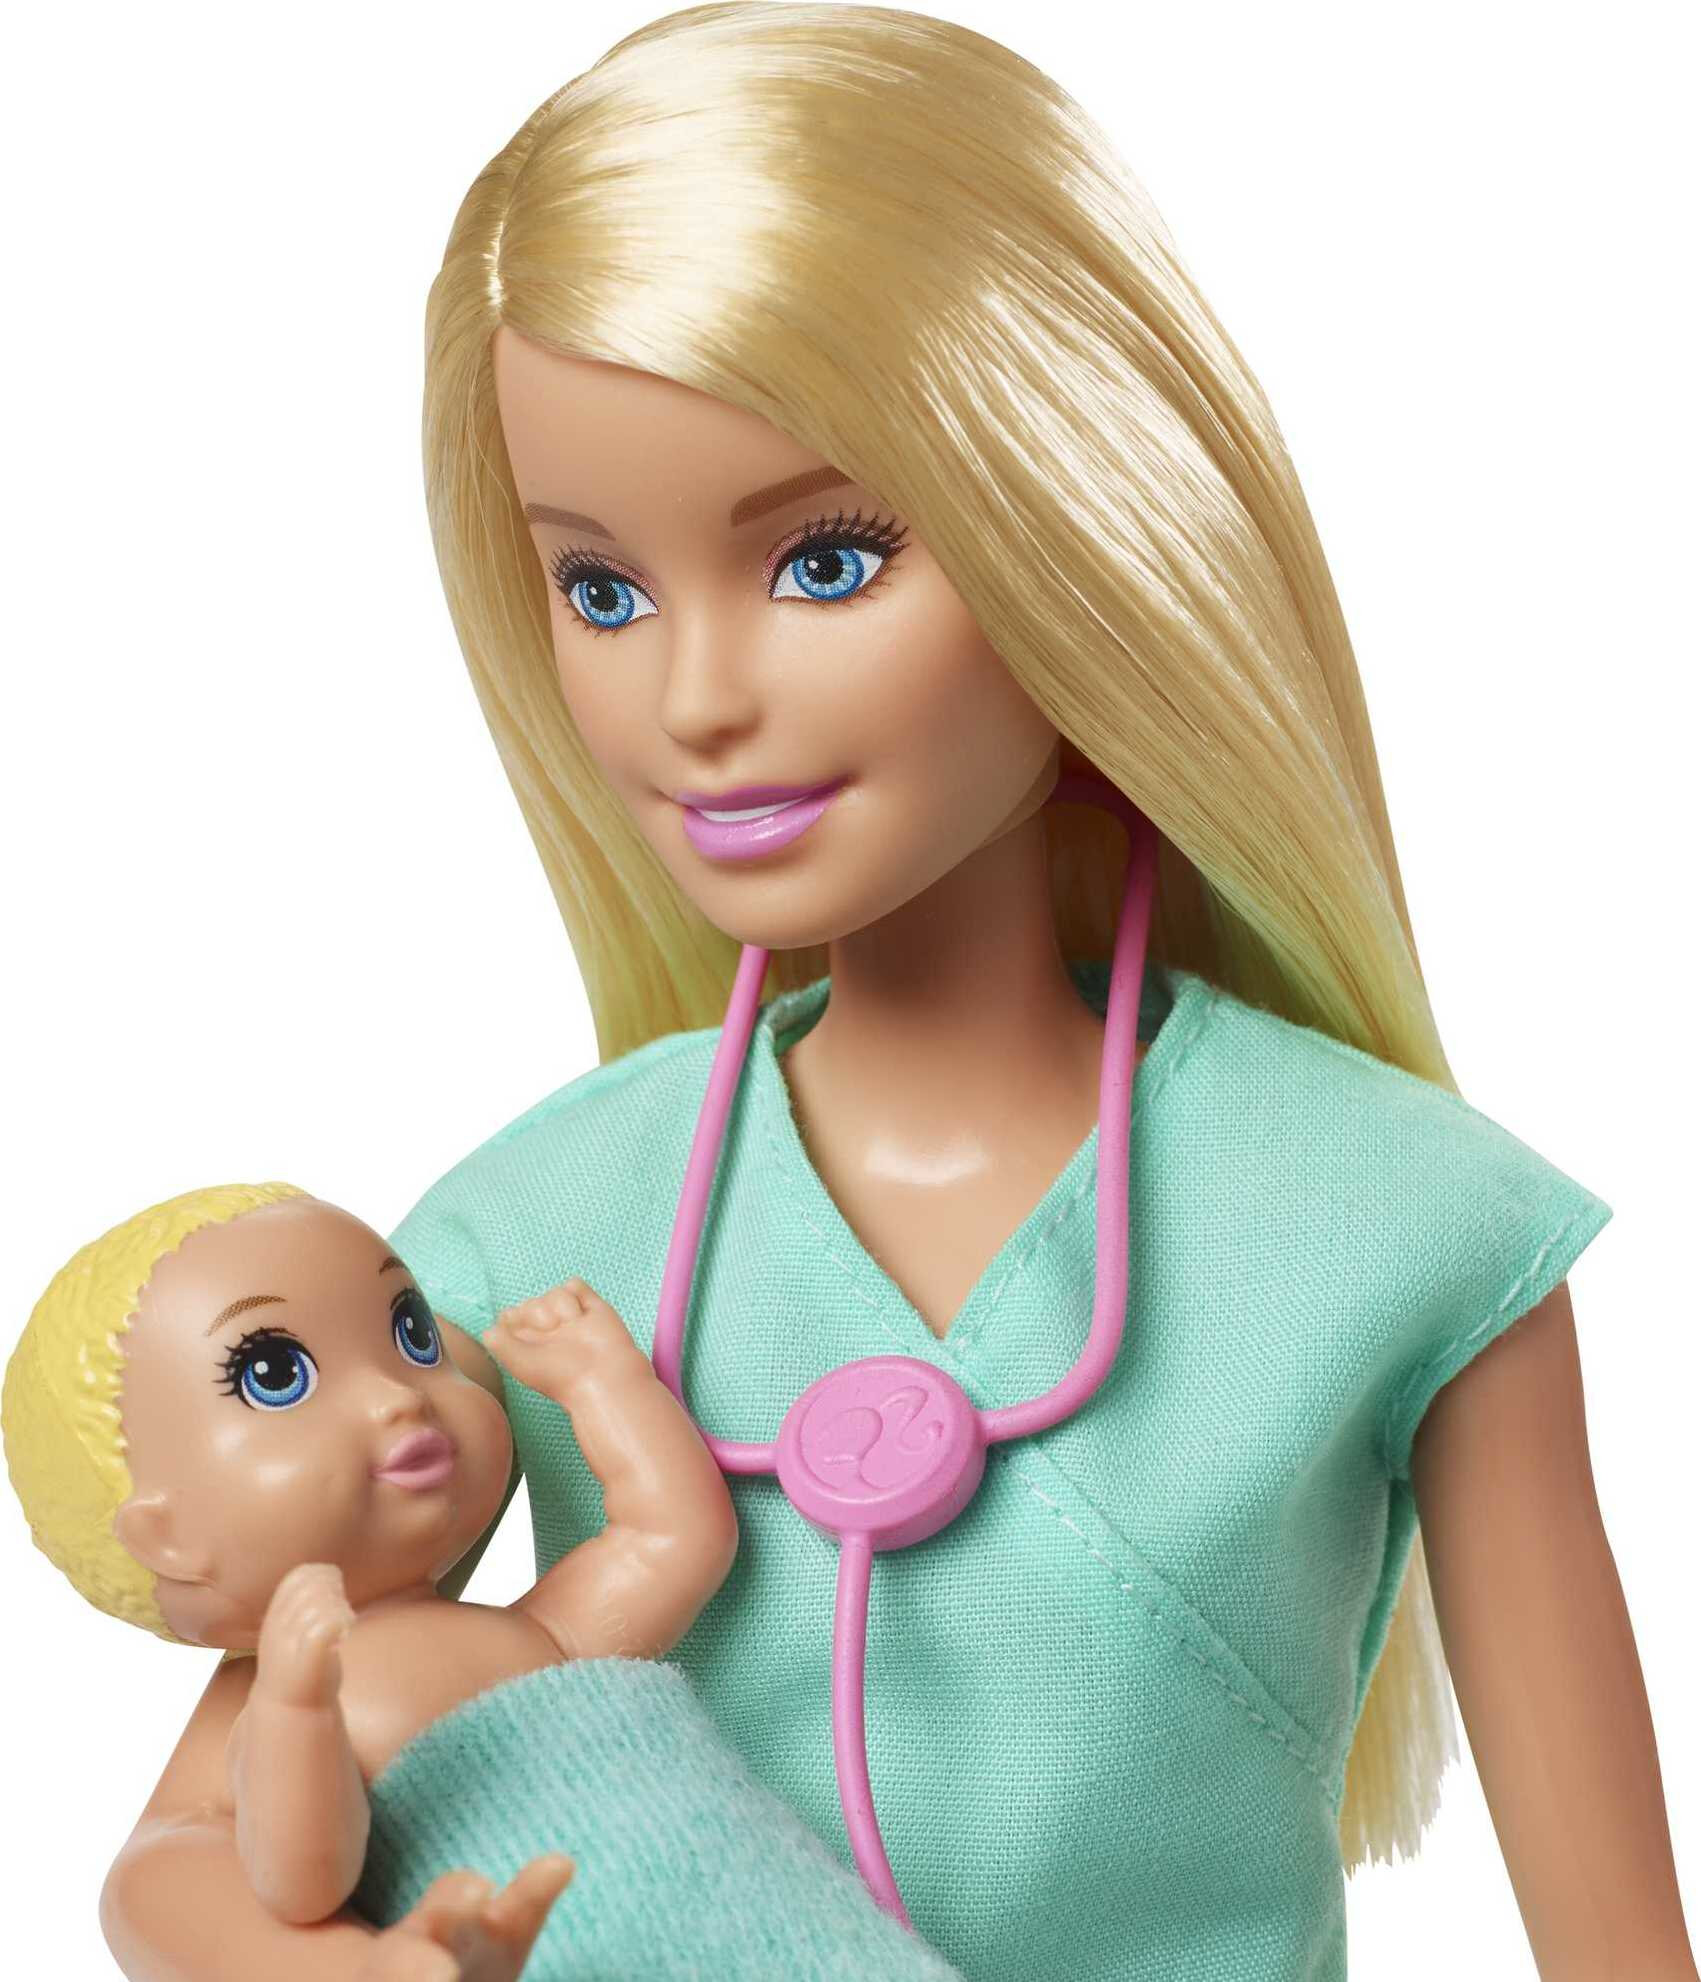 Barbie Careers Baby Doctor Playset with Blonde Fashion Doll, 2 Baby Dolls, Furniture & Accessories - image 3 of 6